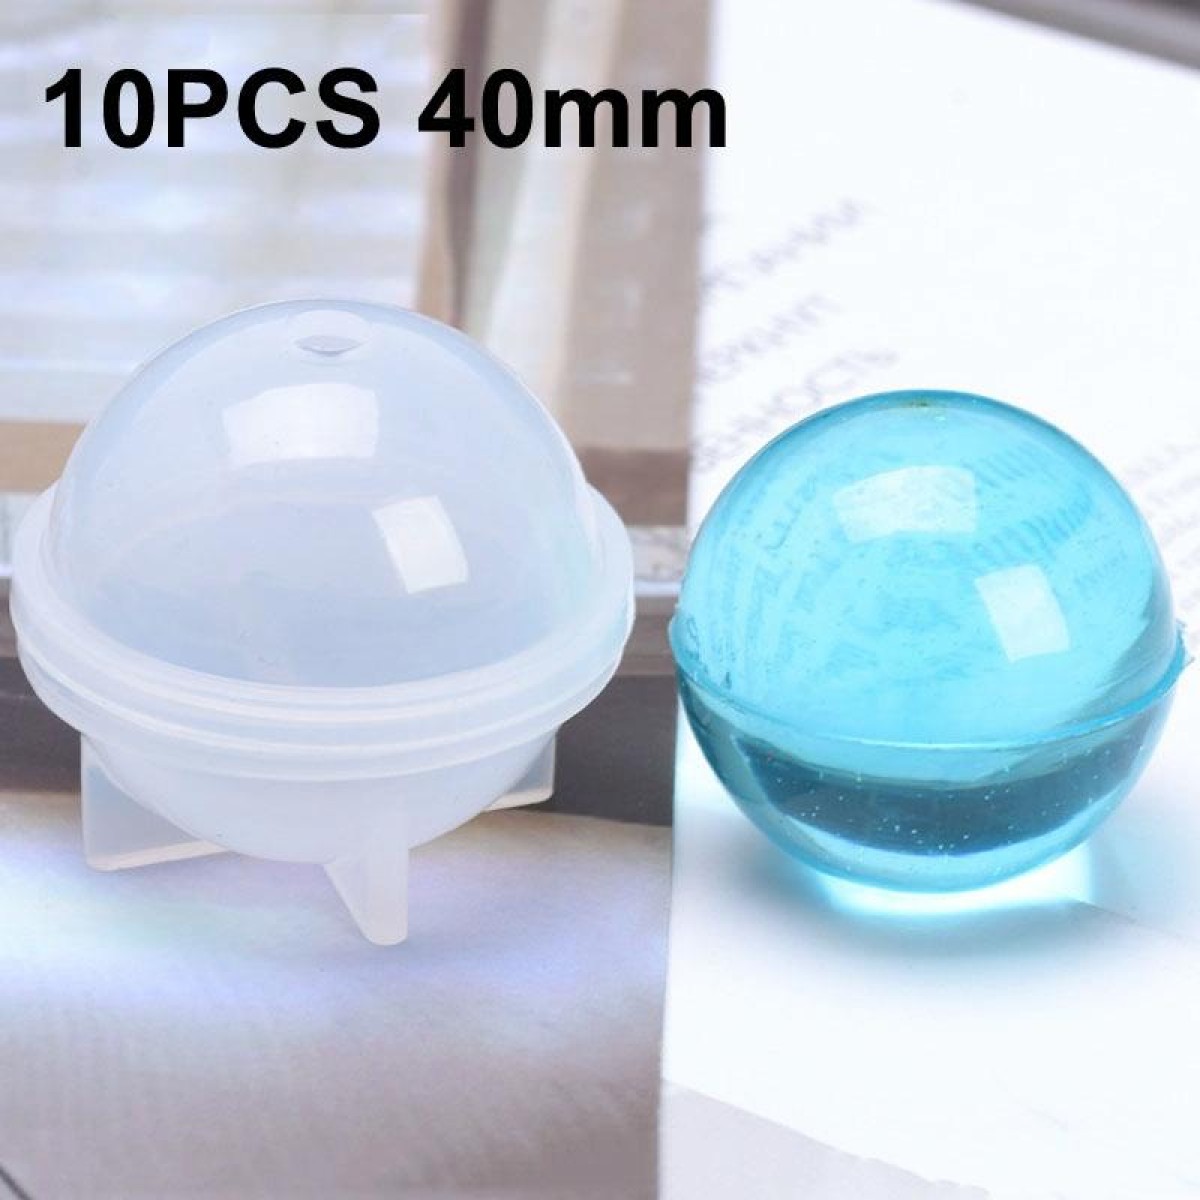 10 PCS 40mm Crystal Epoxy Ball Silicone Mould DIY Handmade Jewelry Sphere Making Mould